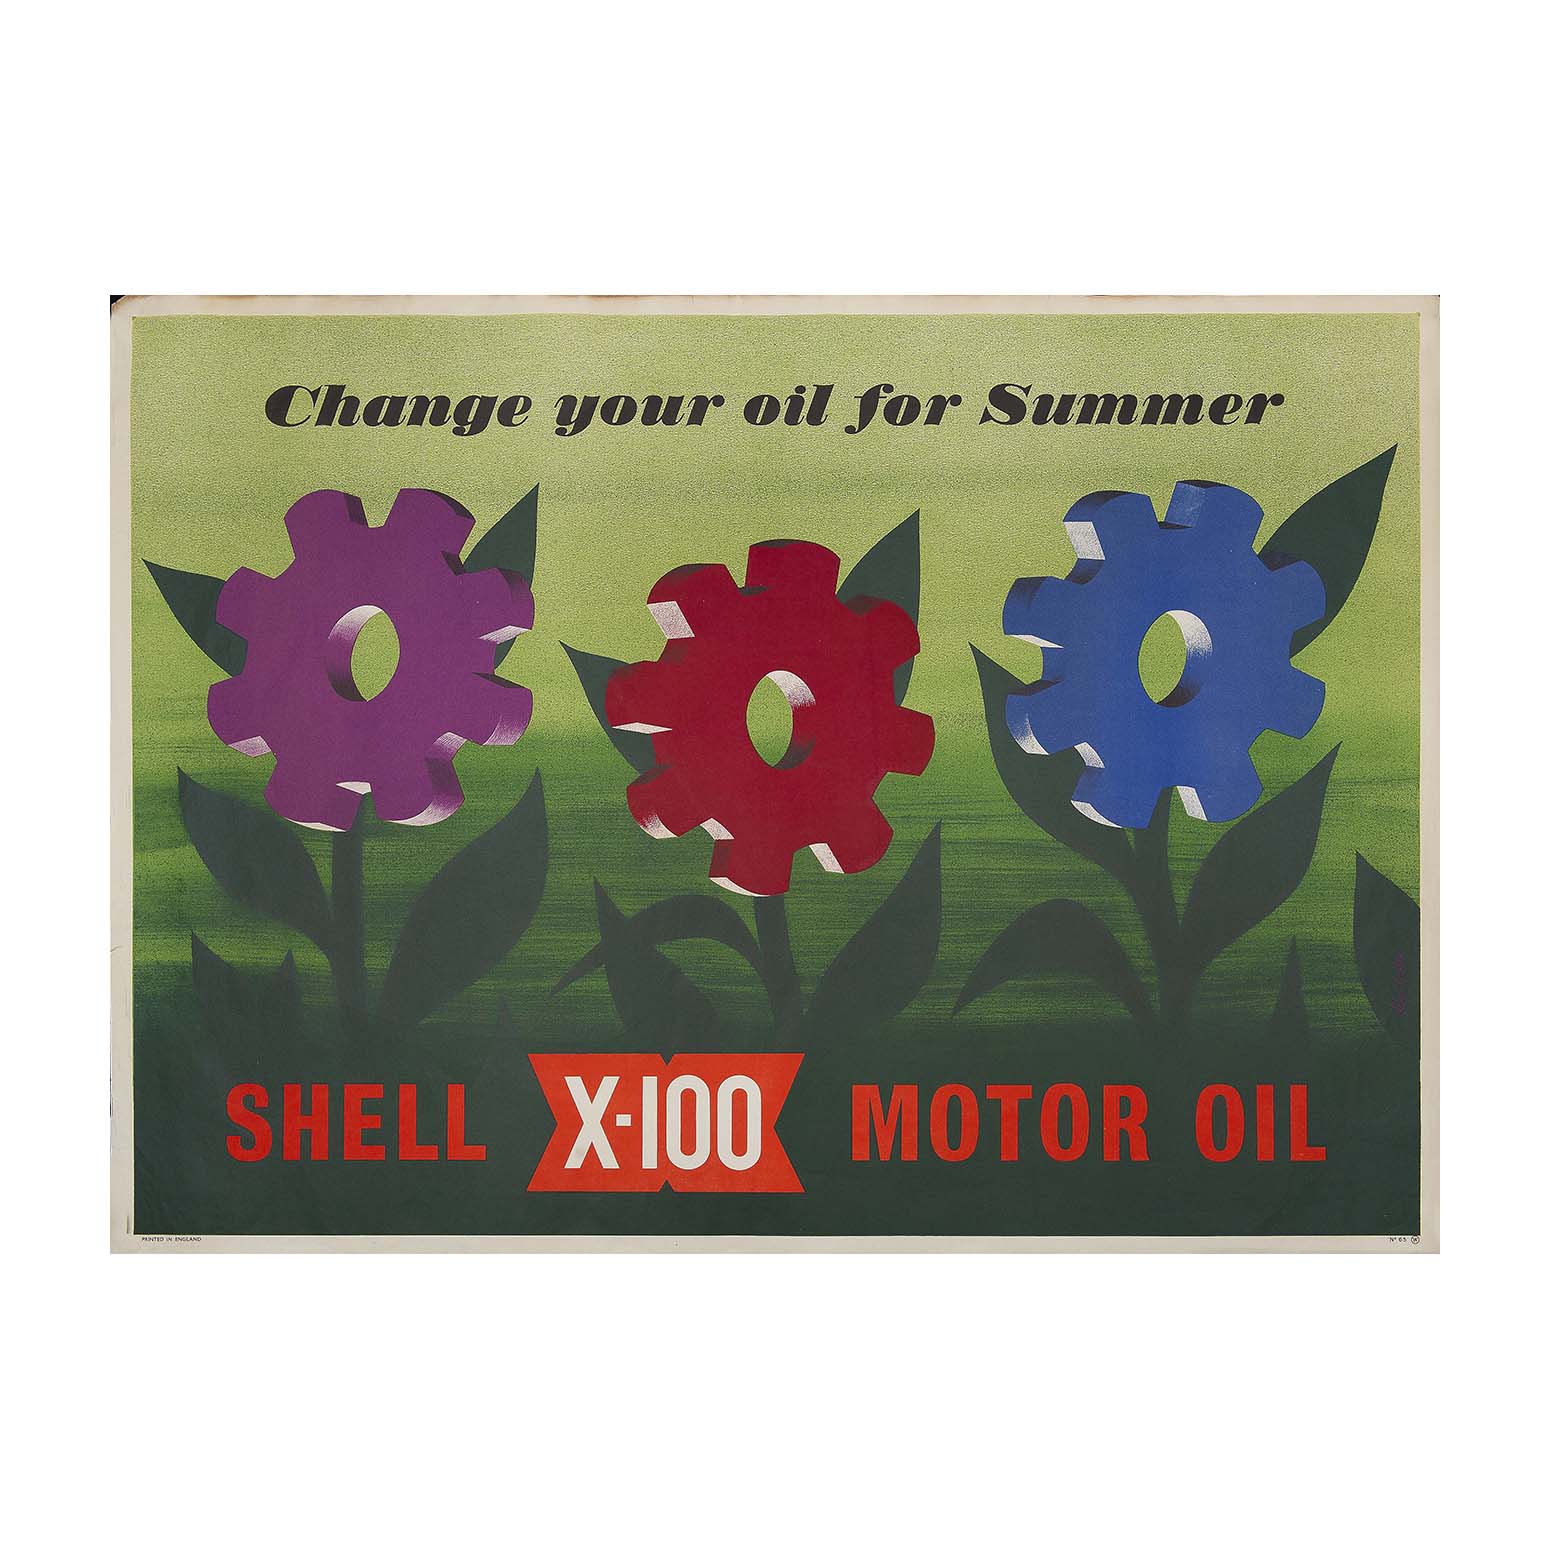 Shell ‘lorry’ poster designed by John Castle, 1953. Image shows 3 flowers made of cogs, with the caption 'Change your oil for Summer - Shell x-100 Motor Oil'.